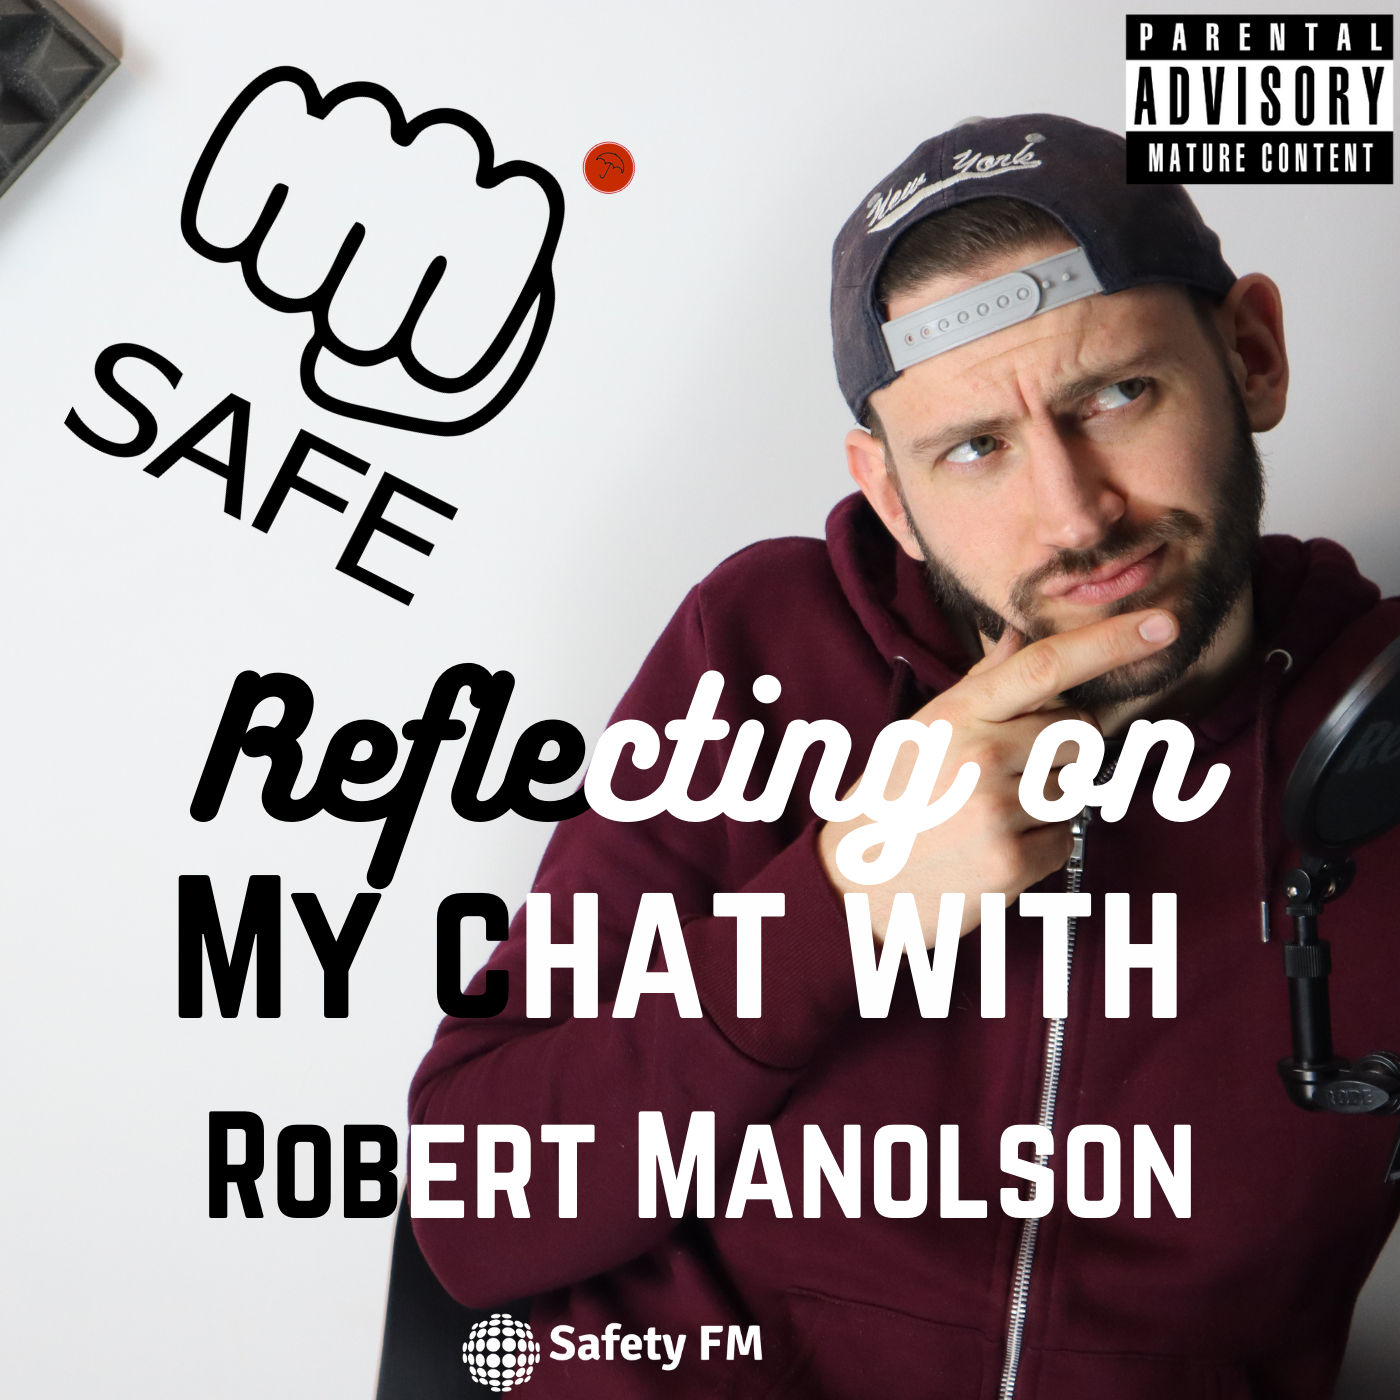 Reflecting on my Chat with Robert Manolson